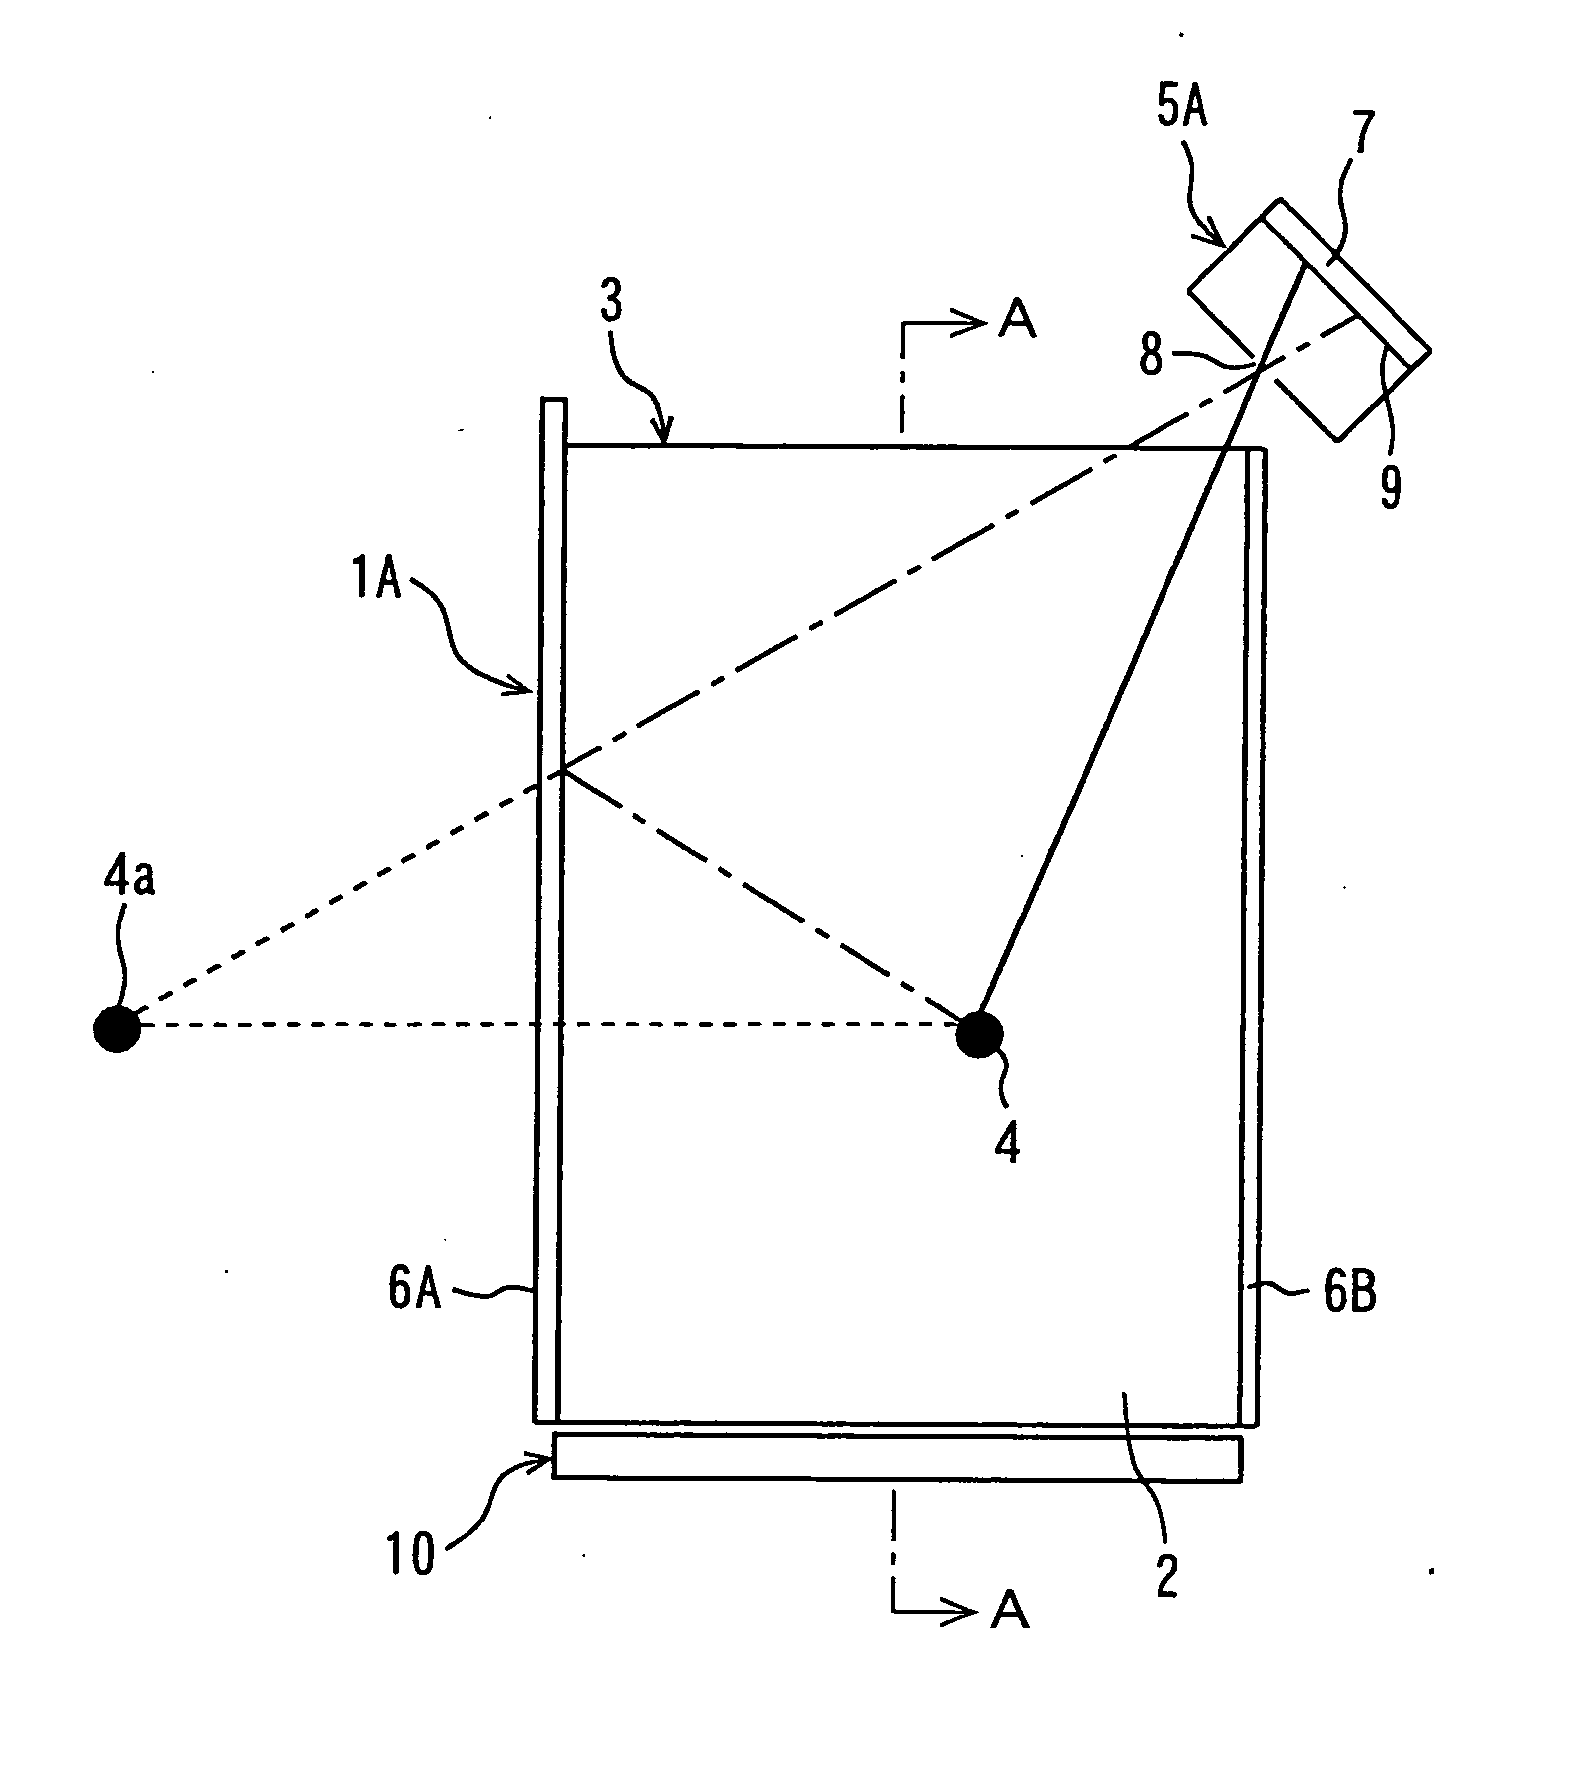 Position-detecting device